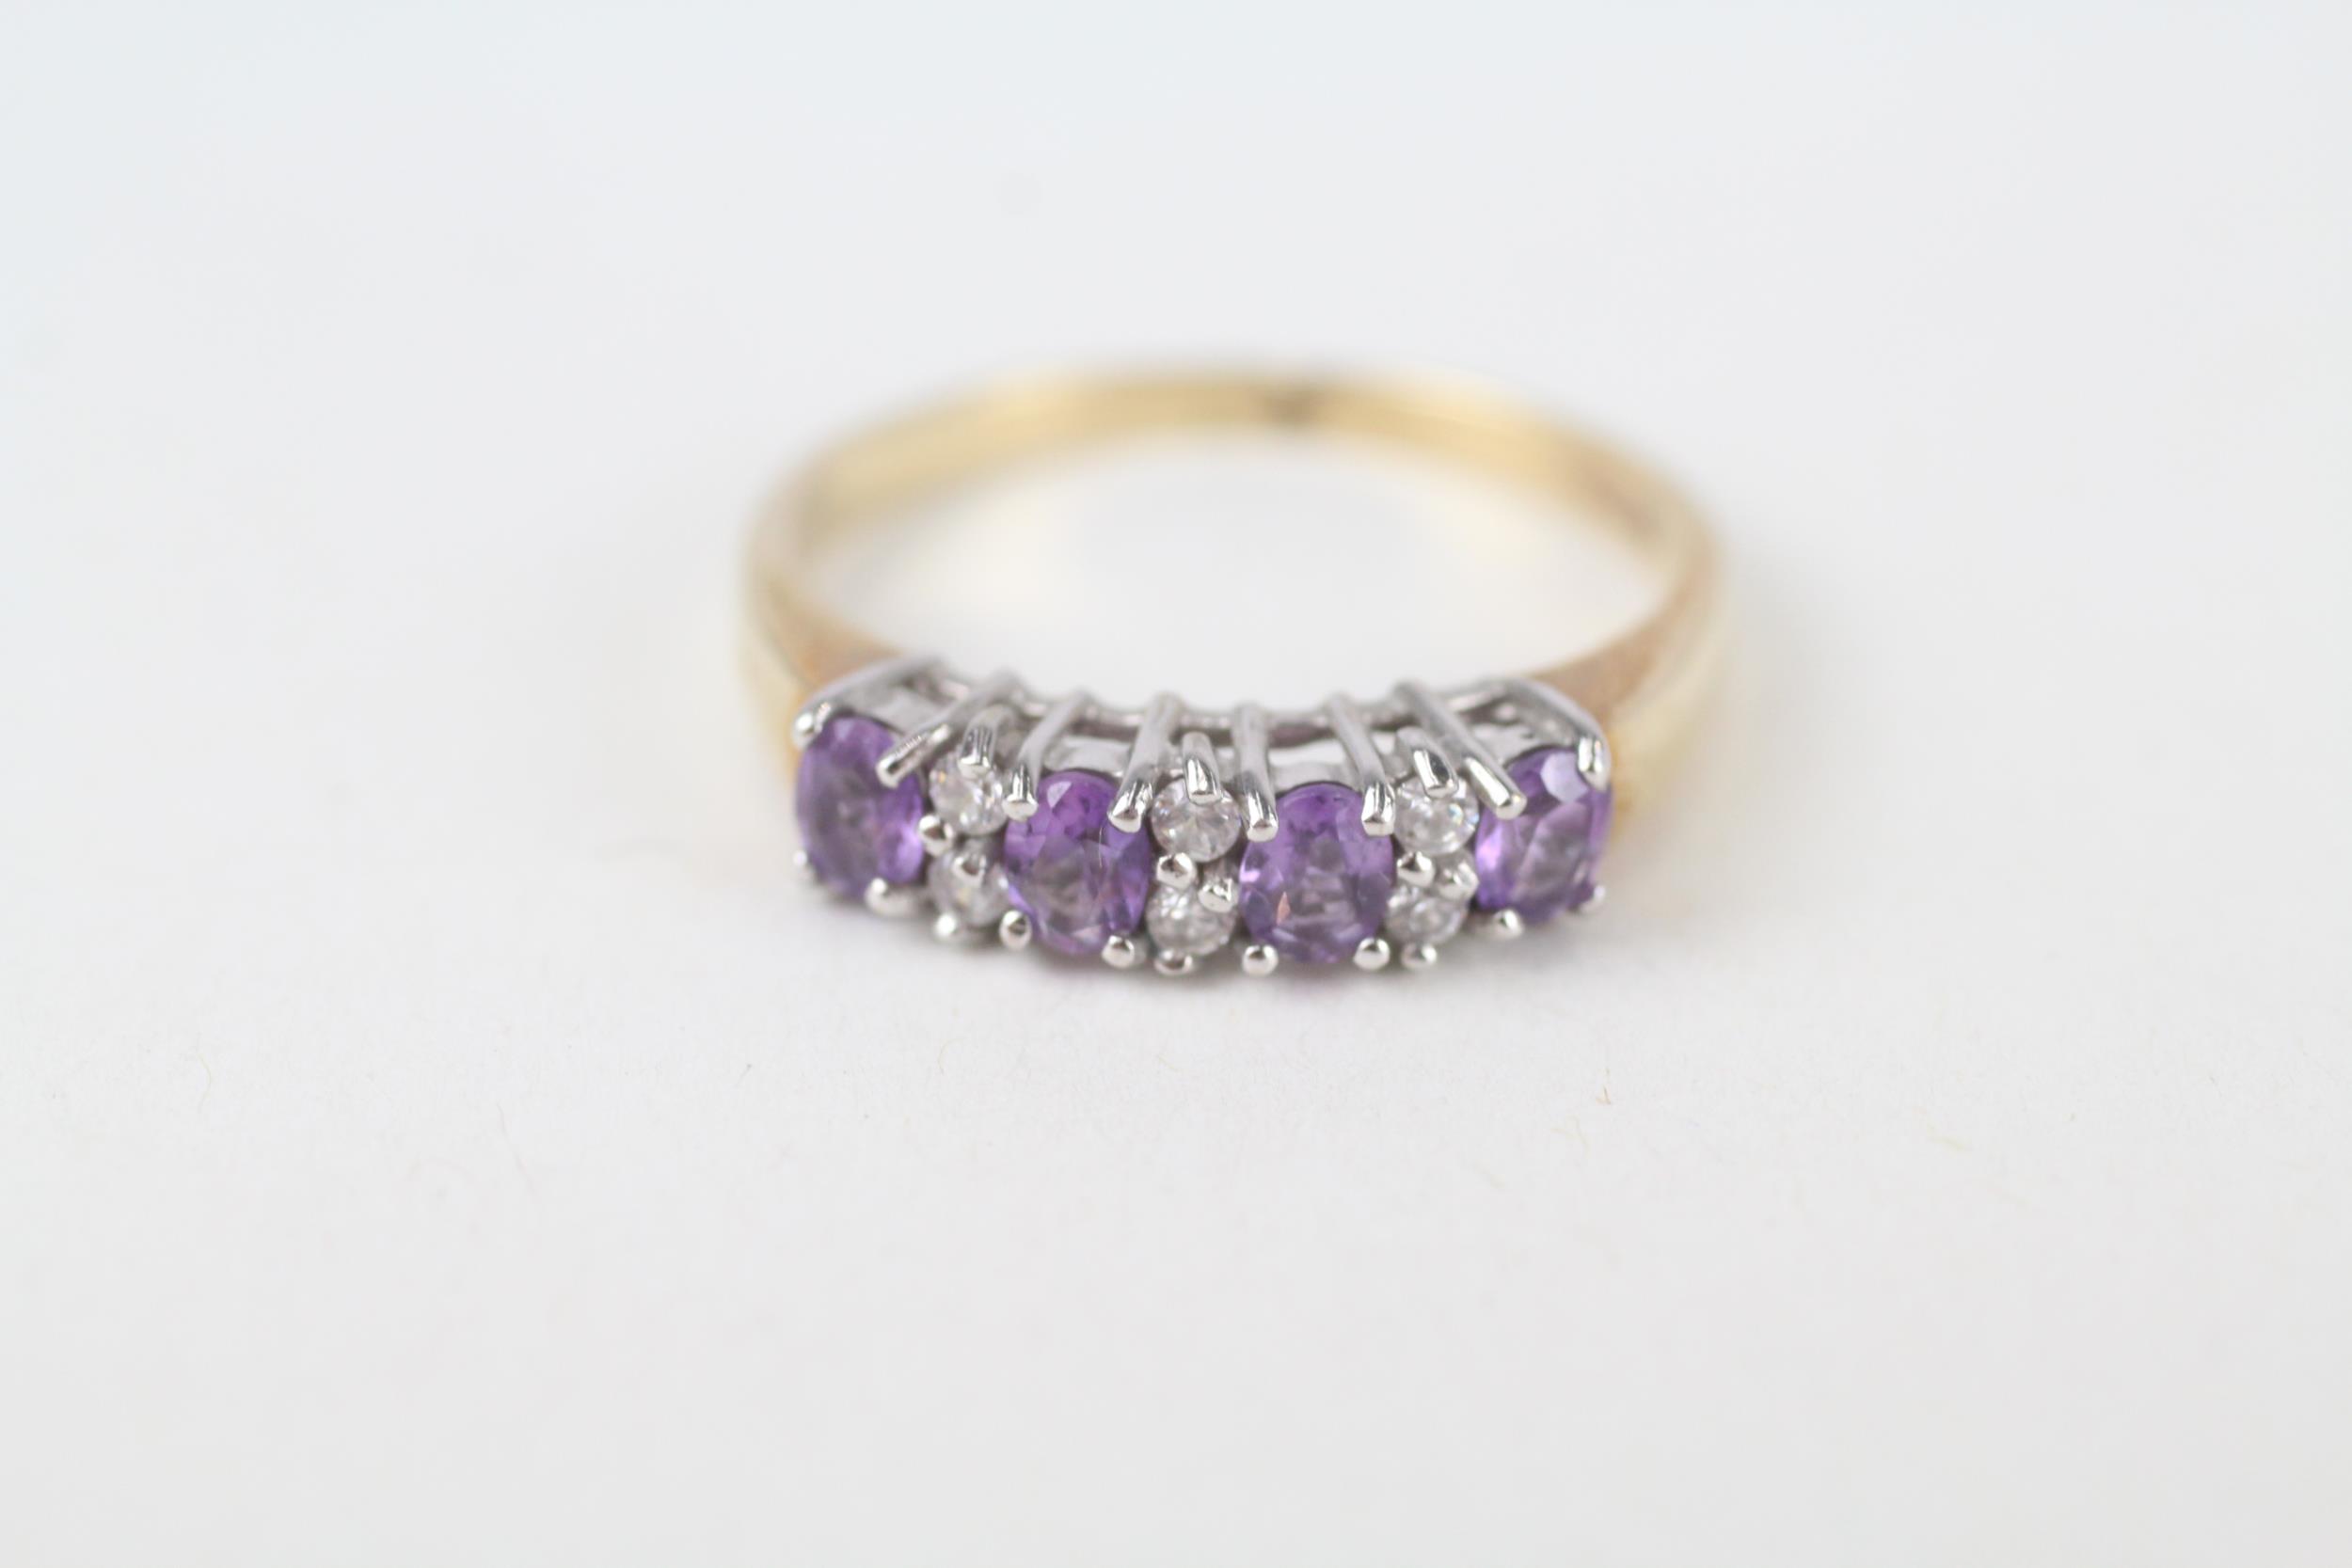 9ct gold amethyst four stone ring with cubic zirconia dividers Size R 1/2 2.6 g - Image 2 of 5